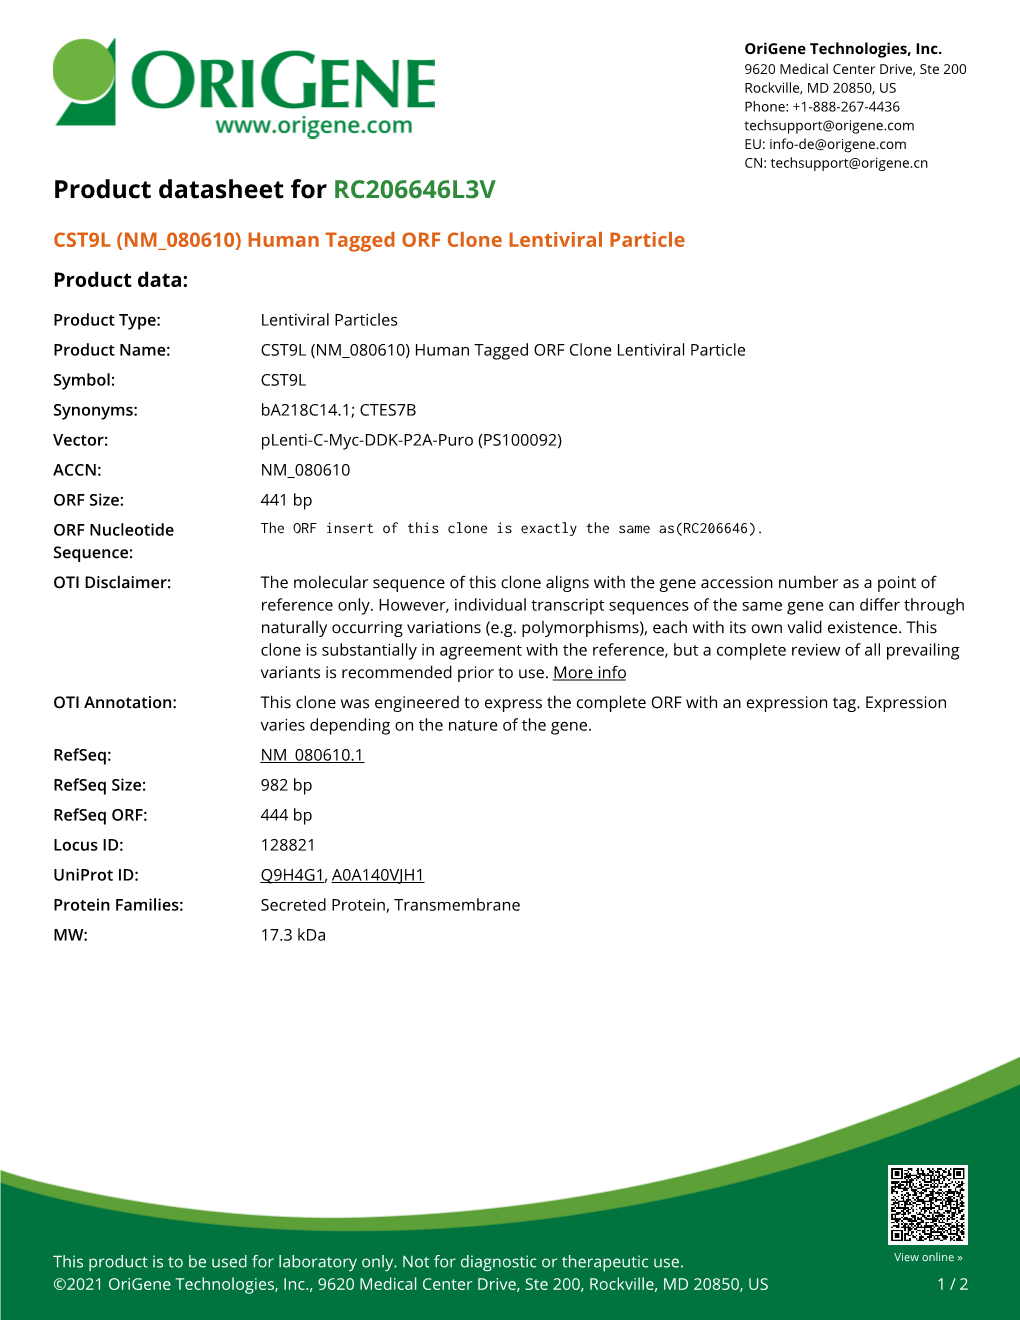 CST9L (NM 080610) Human Tagged ORF Clone Lentiviral Particle Product Data